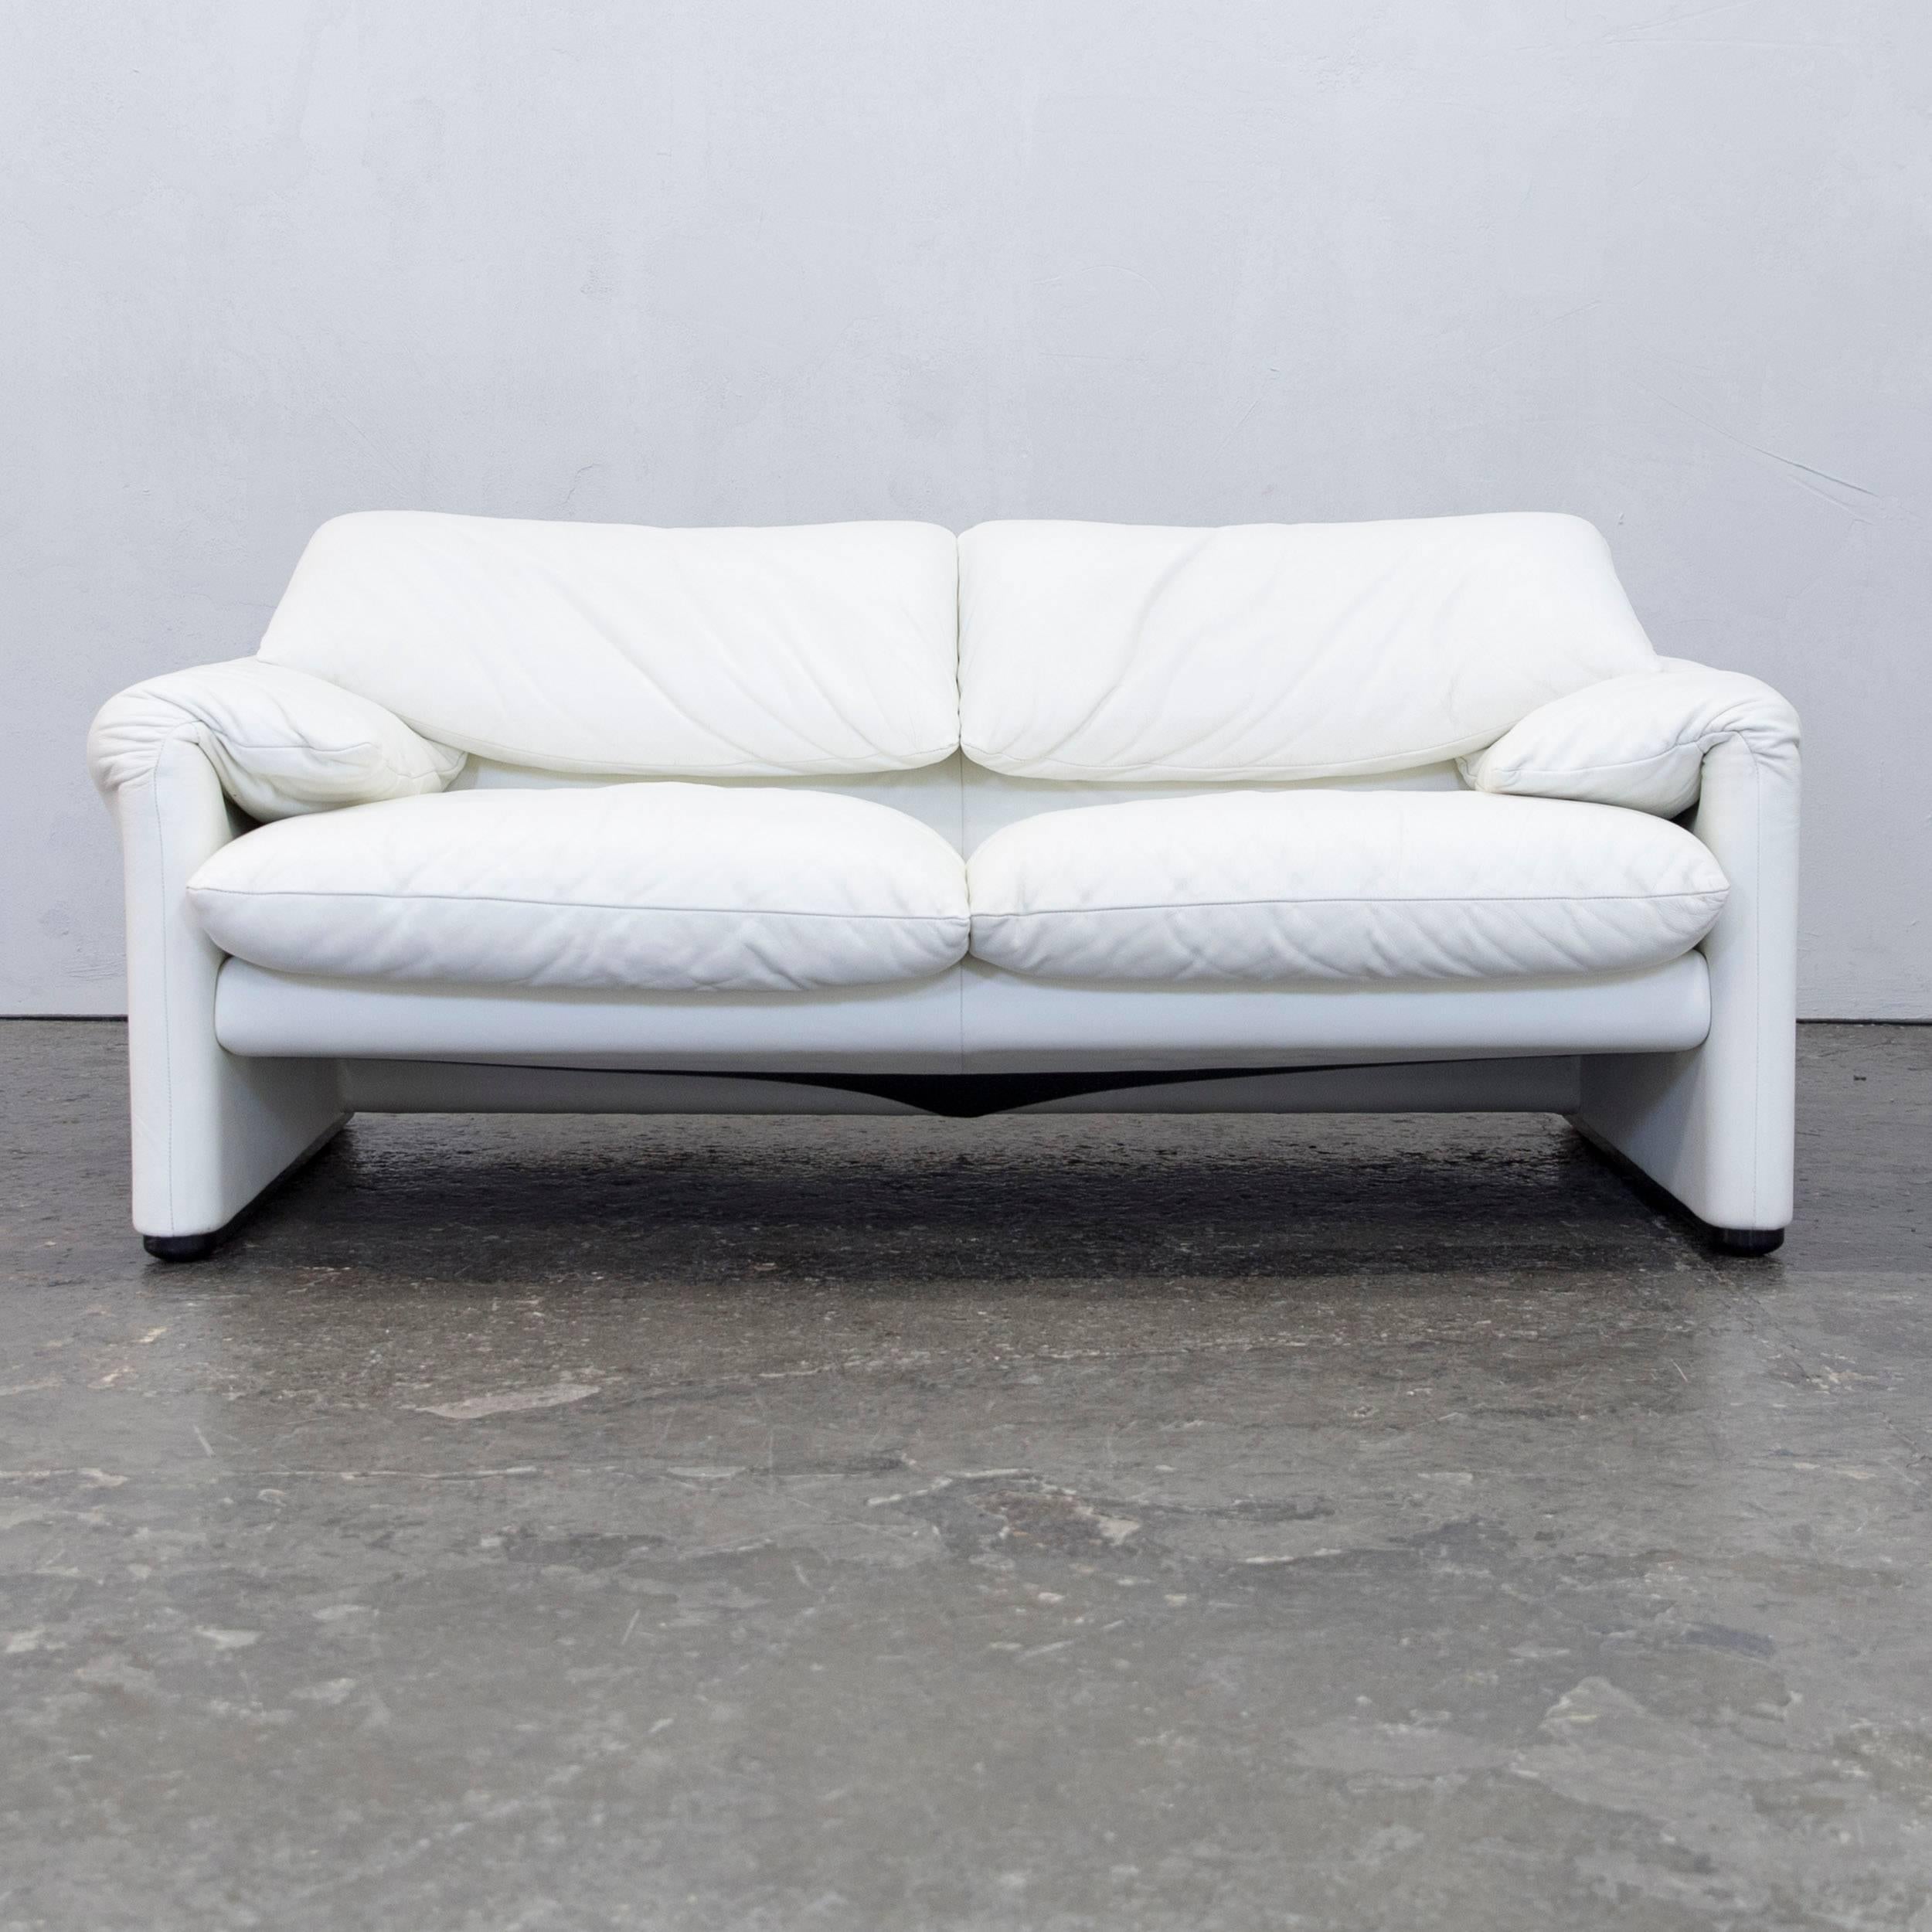 White colored original Cassina Maralunga designer leather sofa in a minimalistic and modern design, with convenient functions, made for pure comfort and flexibility.